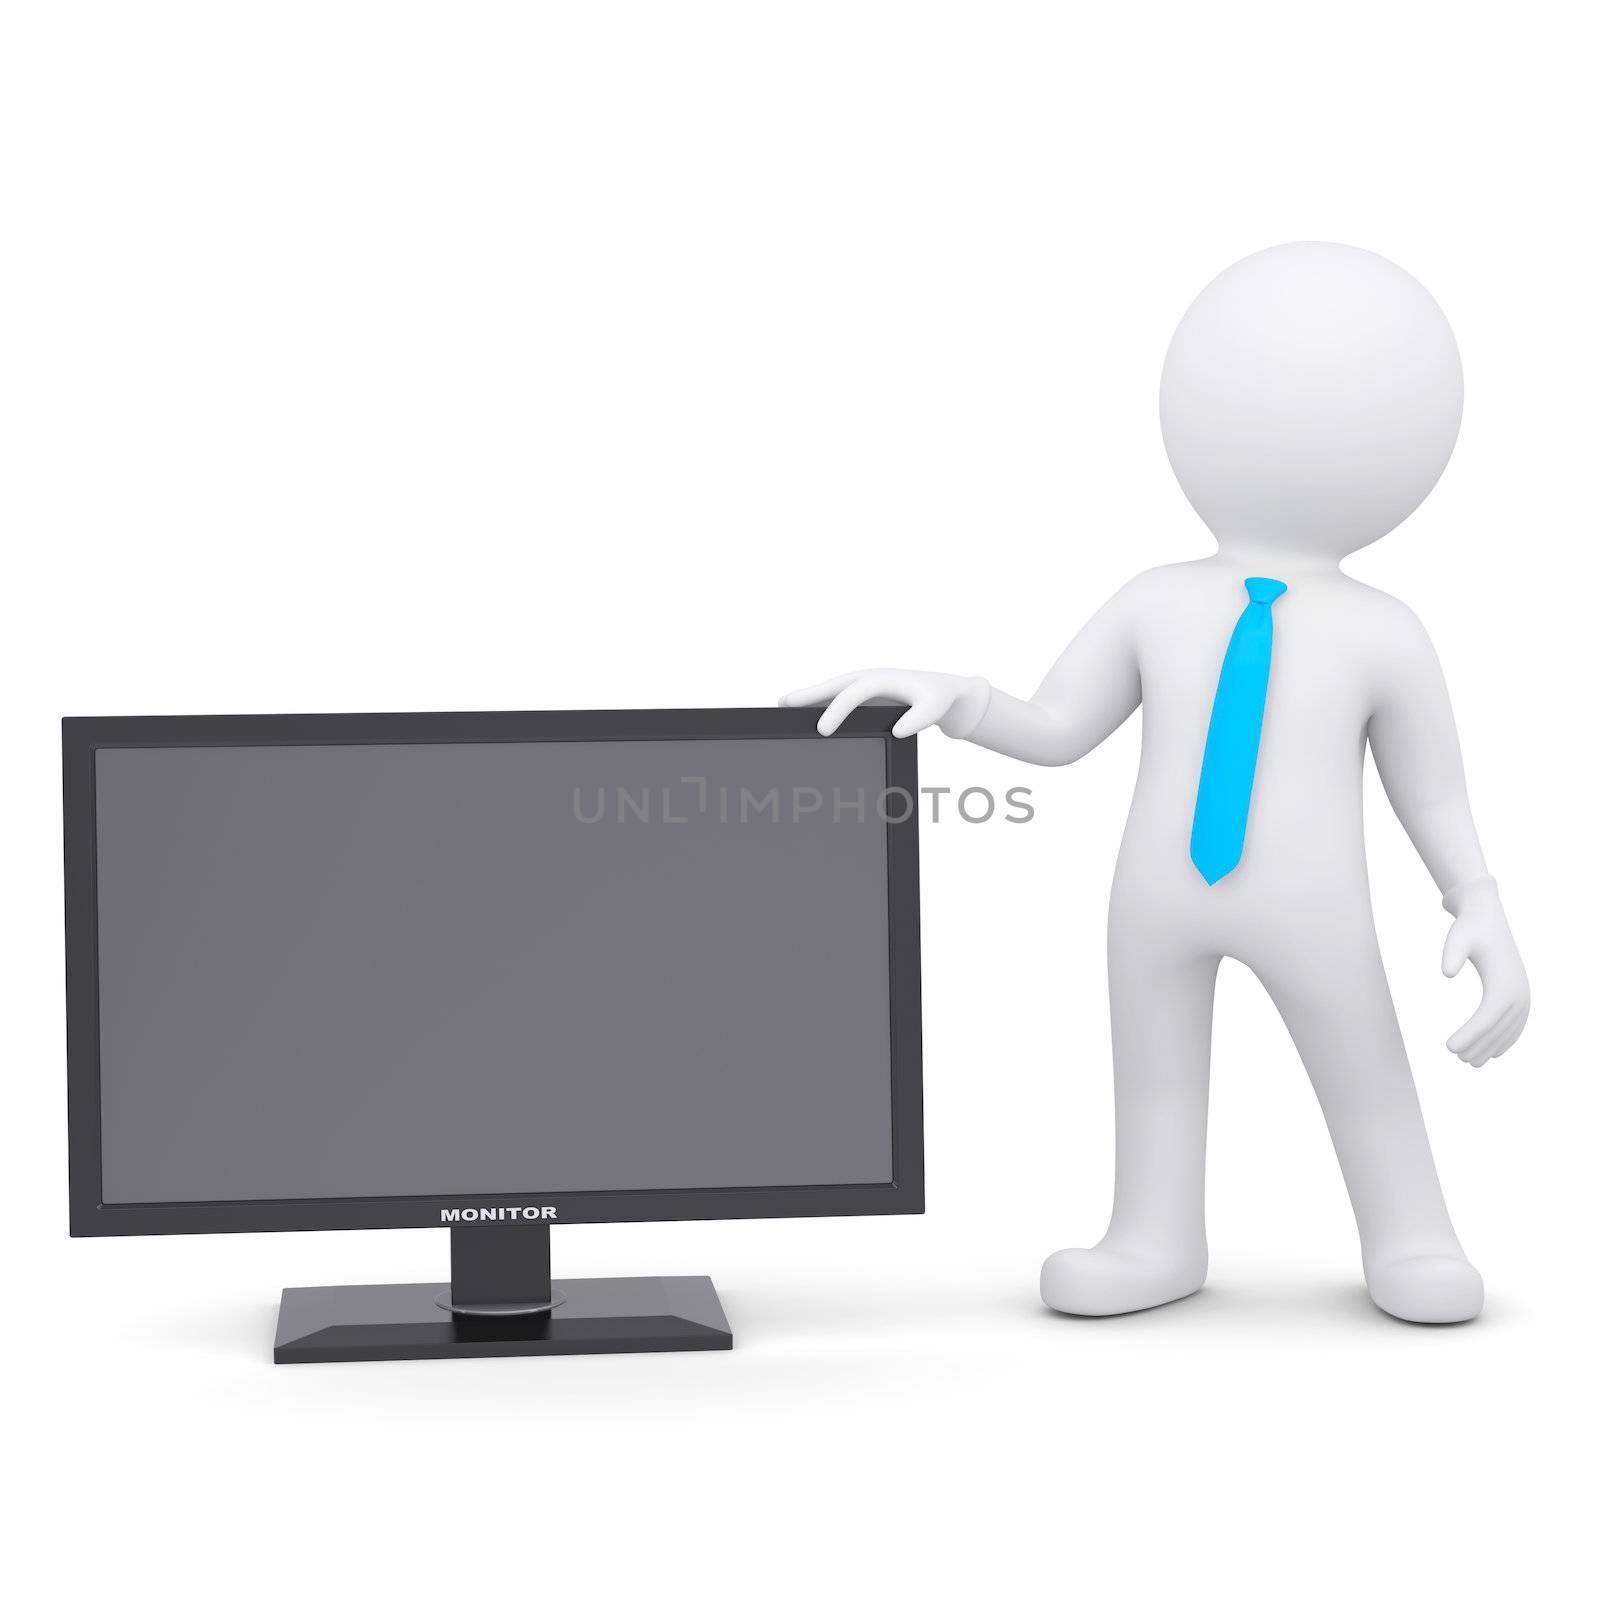 3d white man and the monitor. Isolated render on a white background